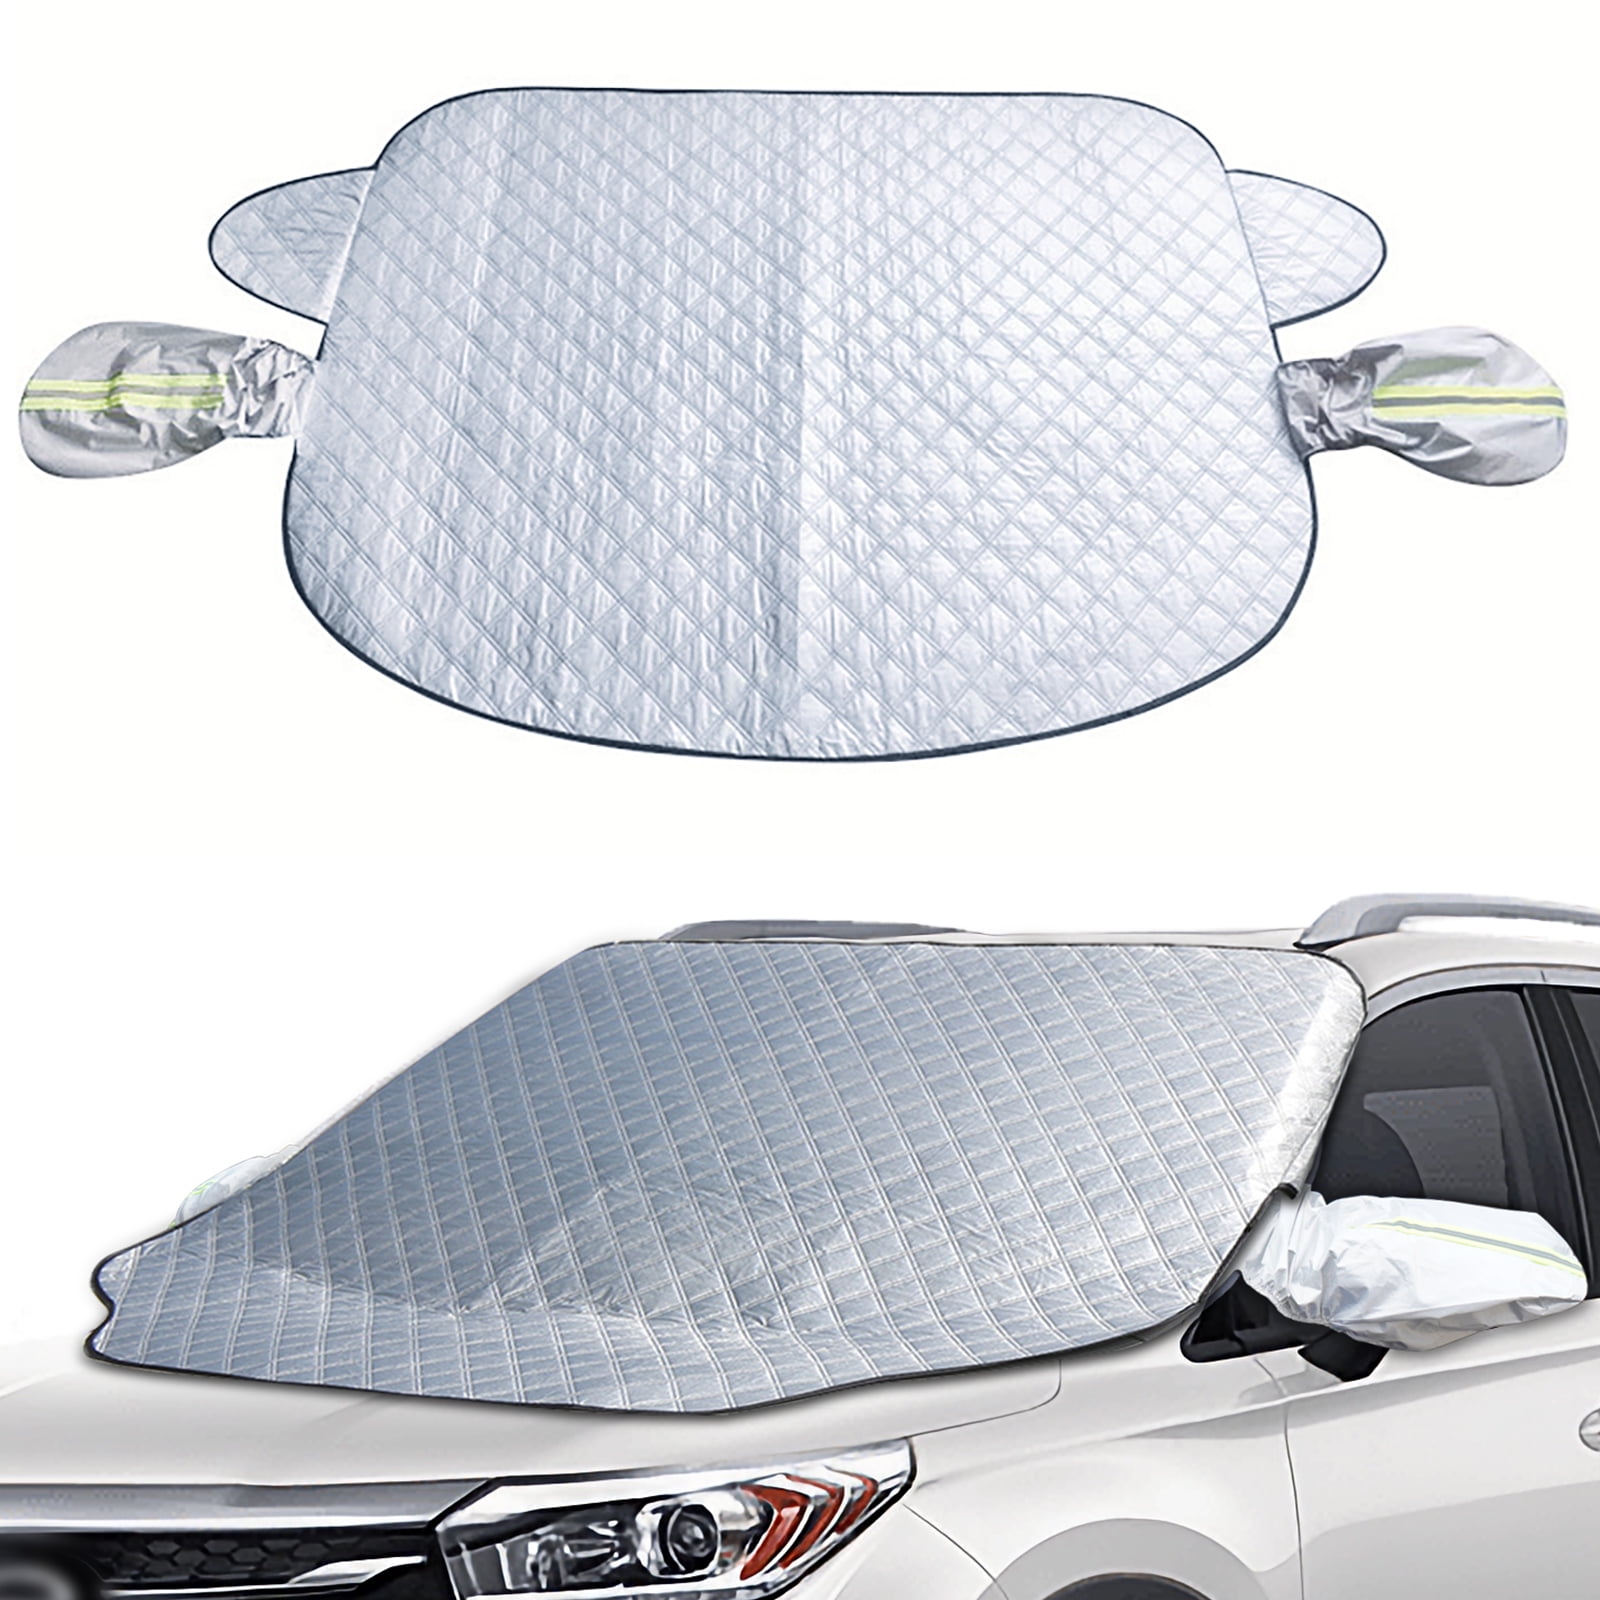 Car Windscreen Cover Sunshade Windshield Frost Snow Cover For T6